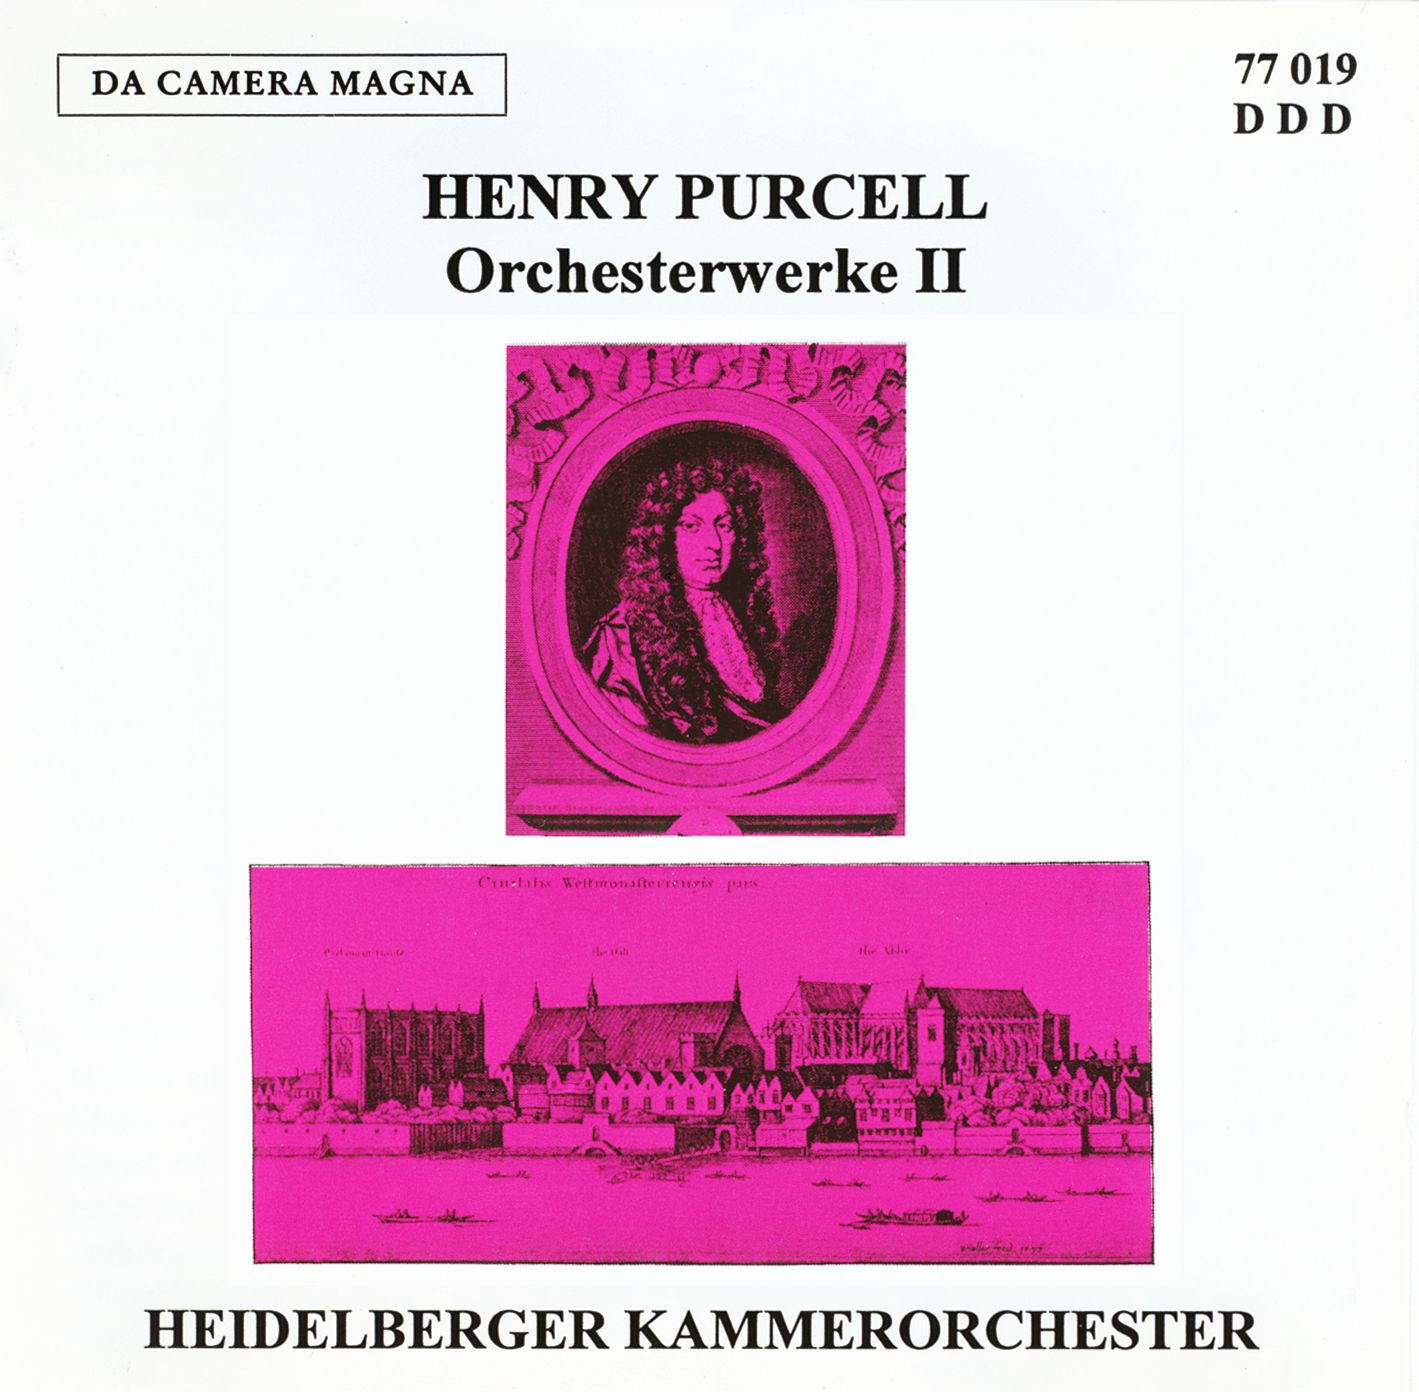 Henry Purcell - Orchesterwerke II